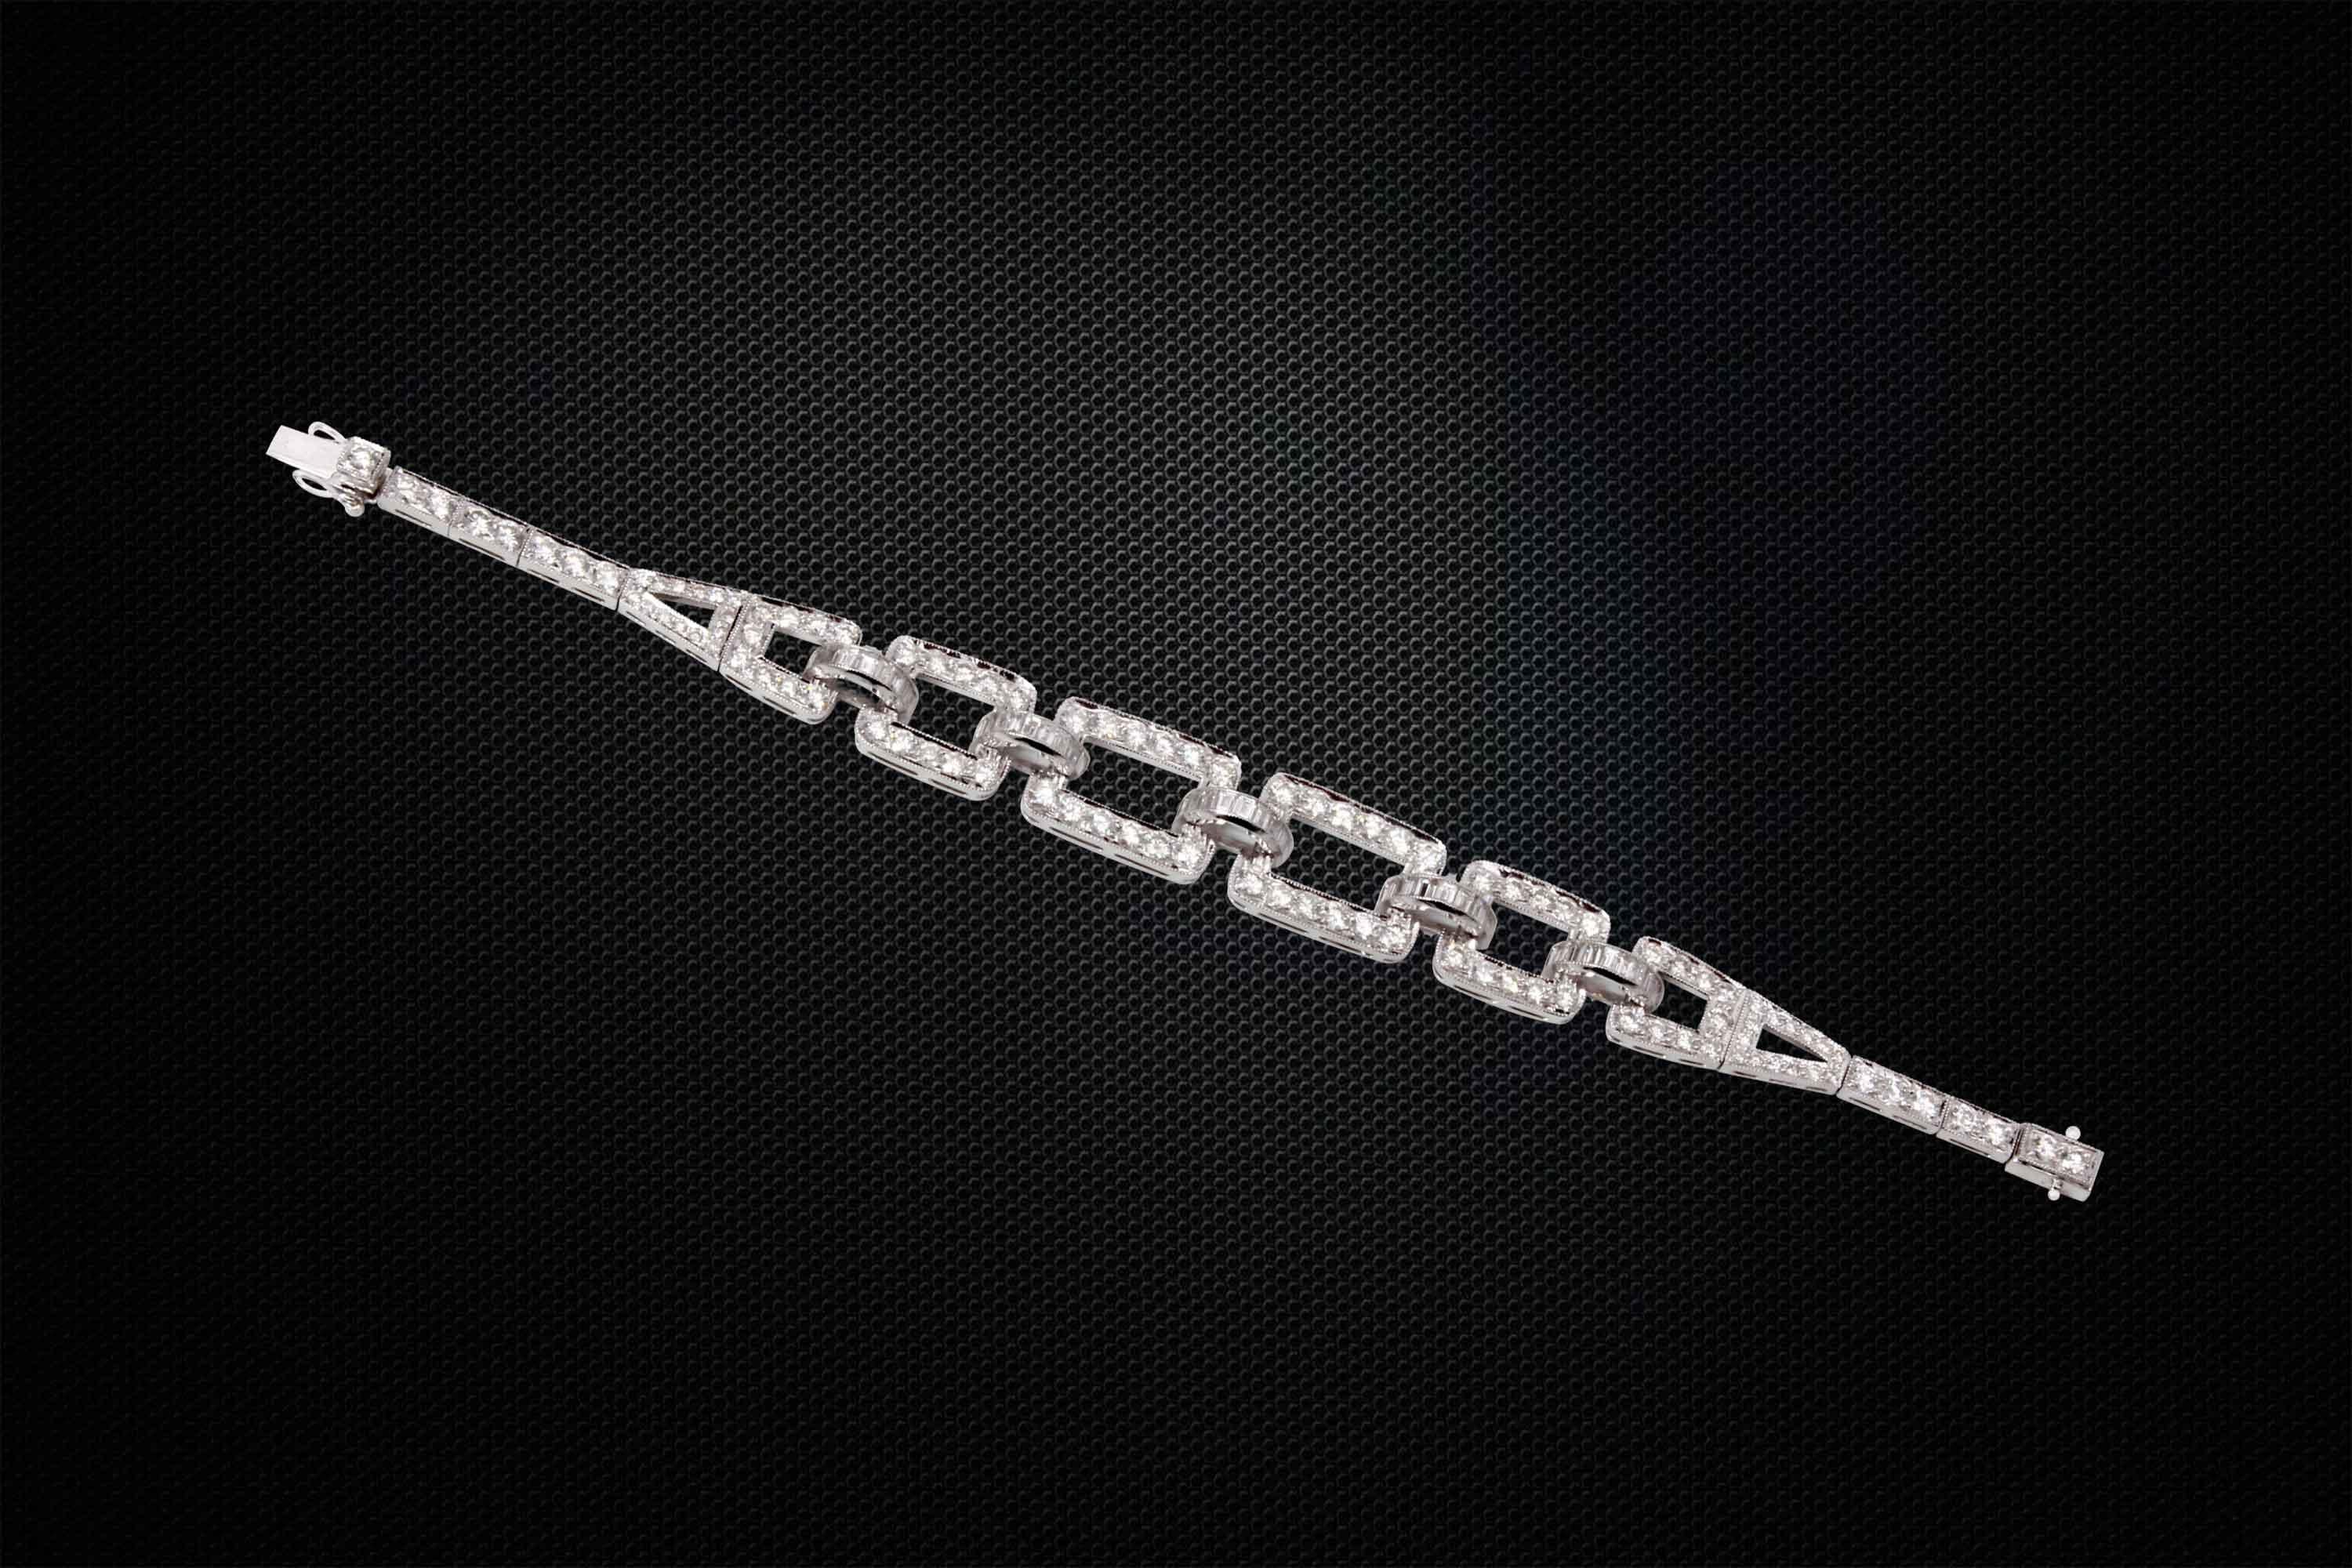 A gorgeous bracelet that can be worn everyday but still dressy enough for evening.
It has 105 pcs of round cut white diamonds weighing 6.22 carats and 46 pcs of  baguette cut diamonds weighing 1.84 carats set in 18k white gold.
Handcrafted in 18K